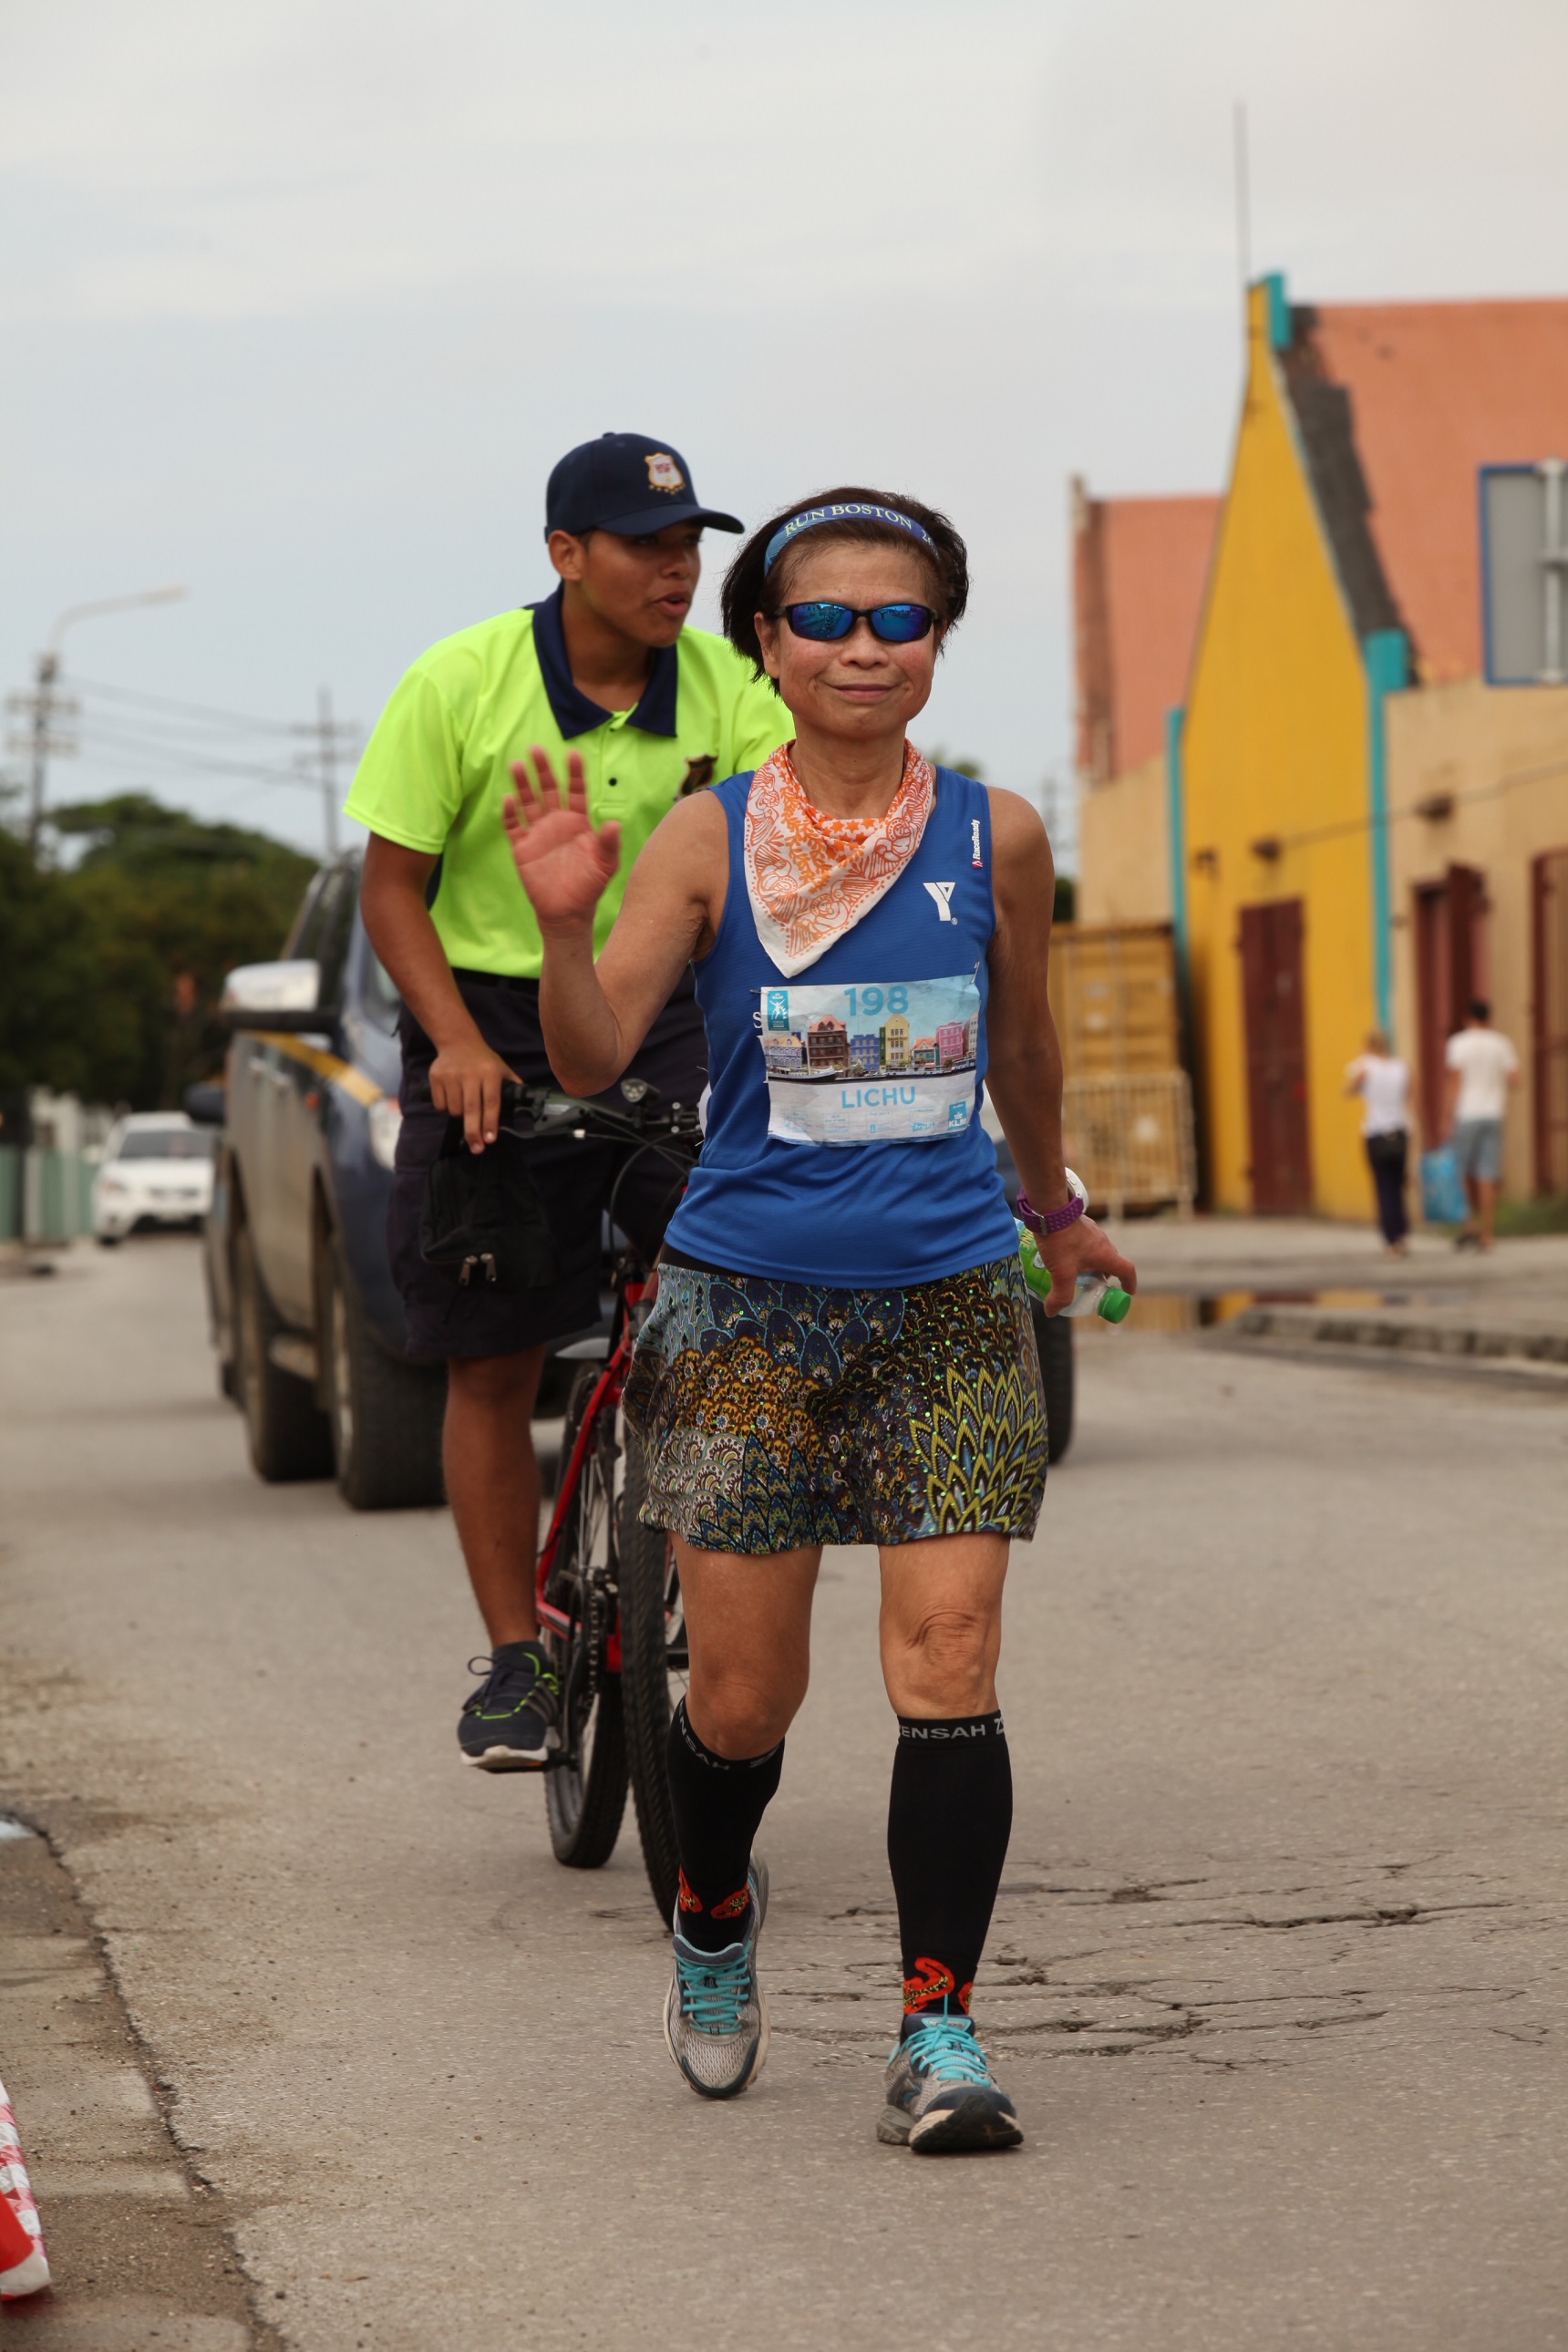 November 27th the 3rd KLM Curacao Marathon took place in Willemstad, Curacao